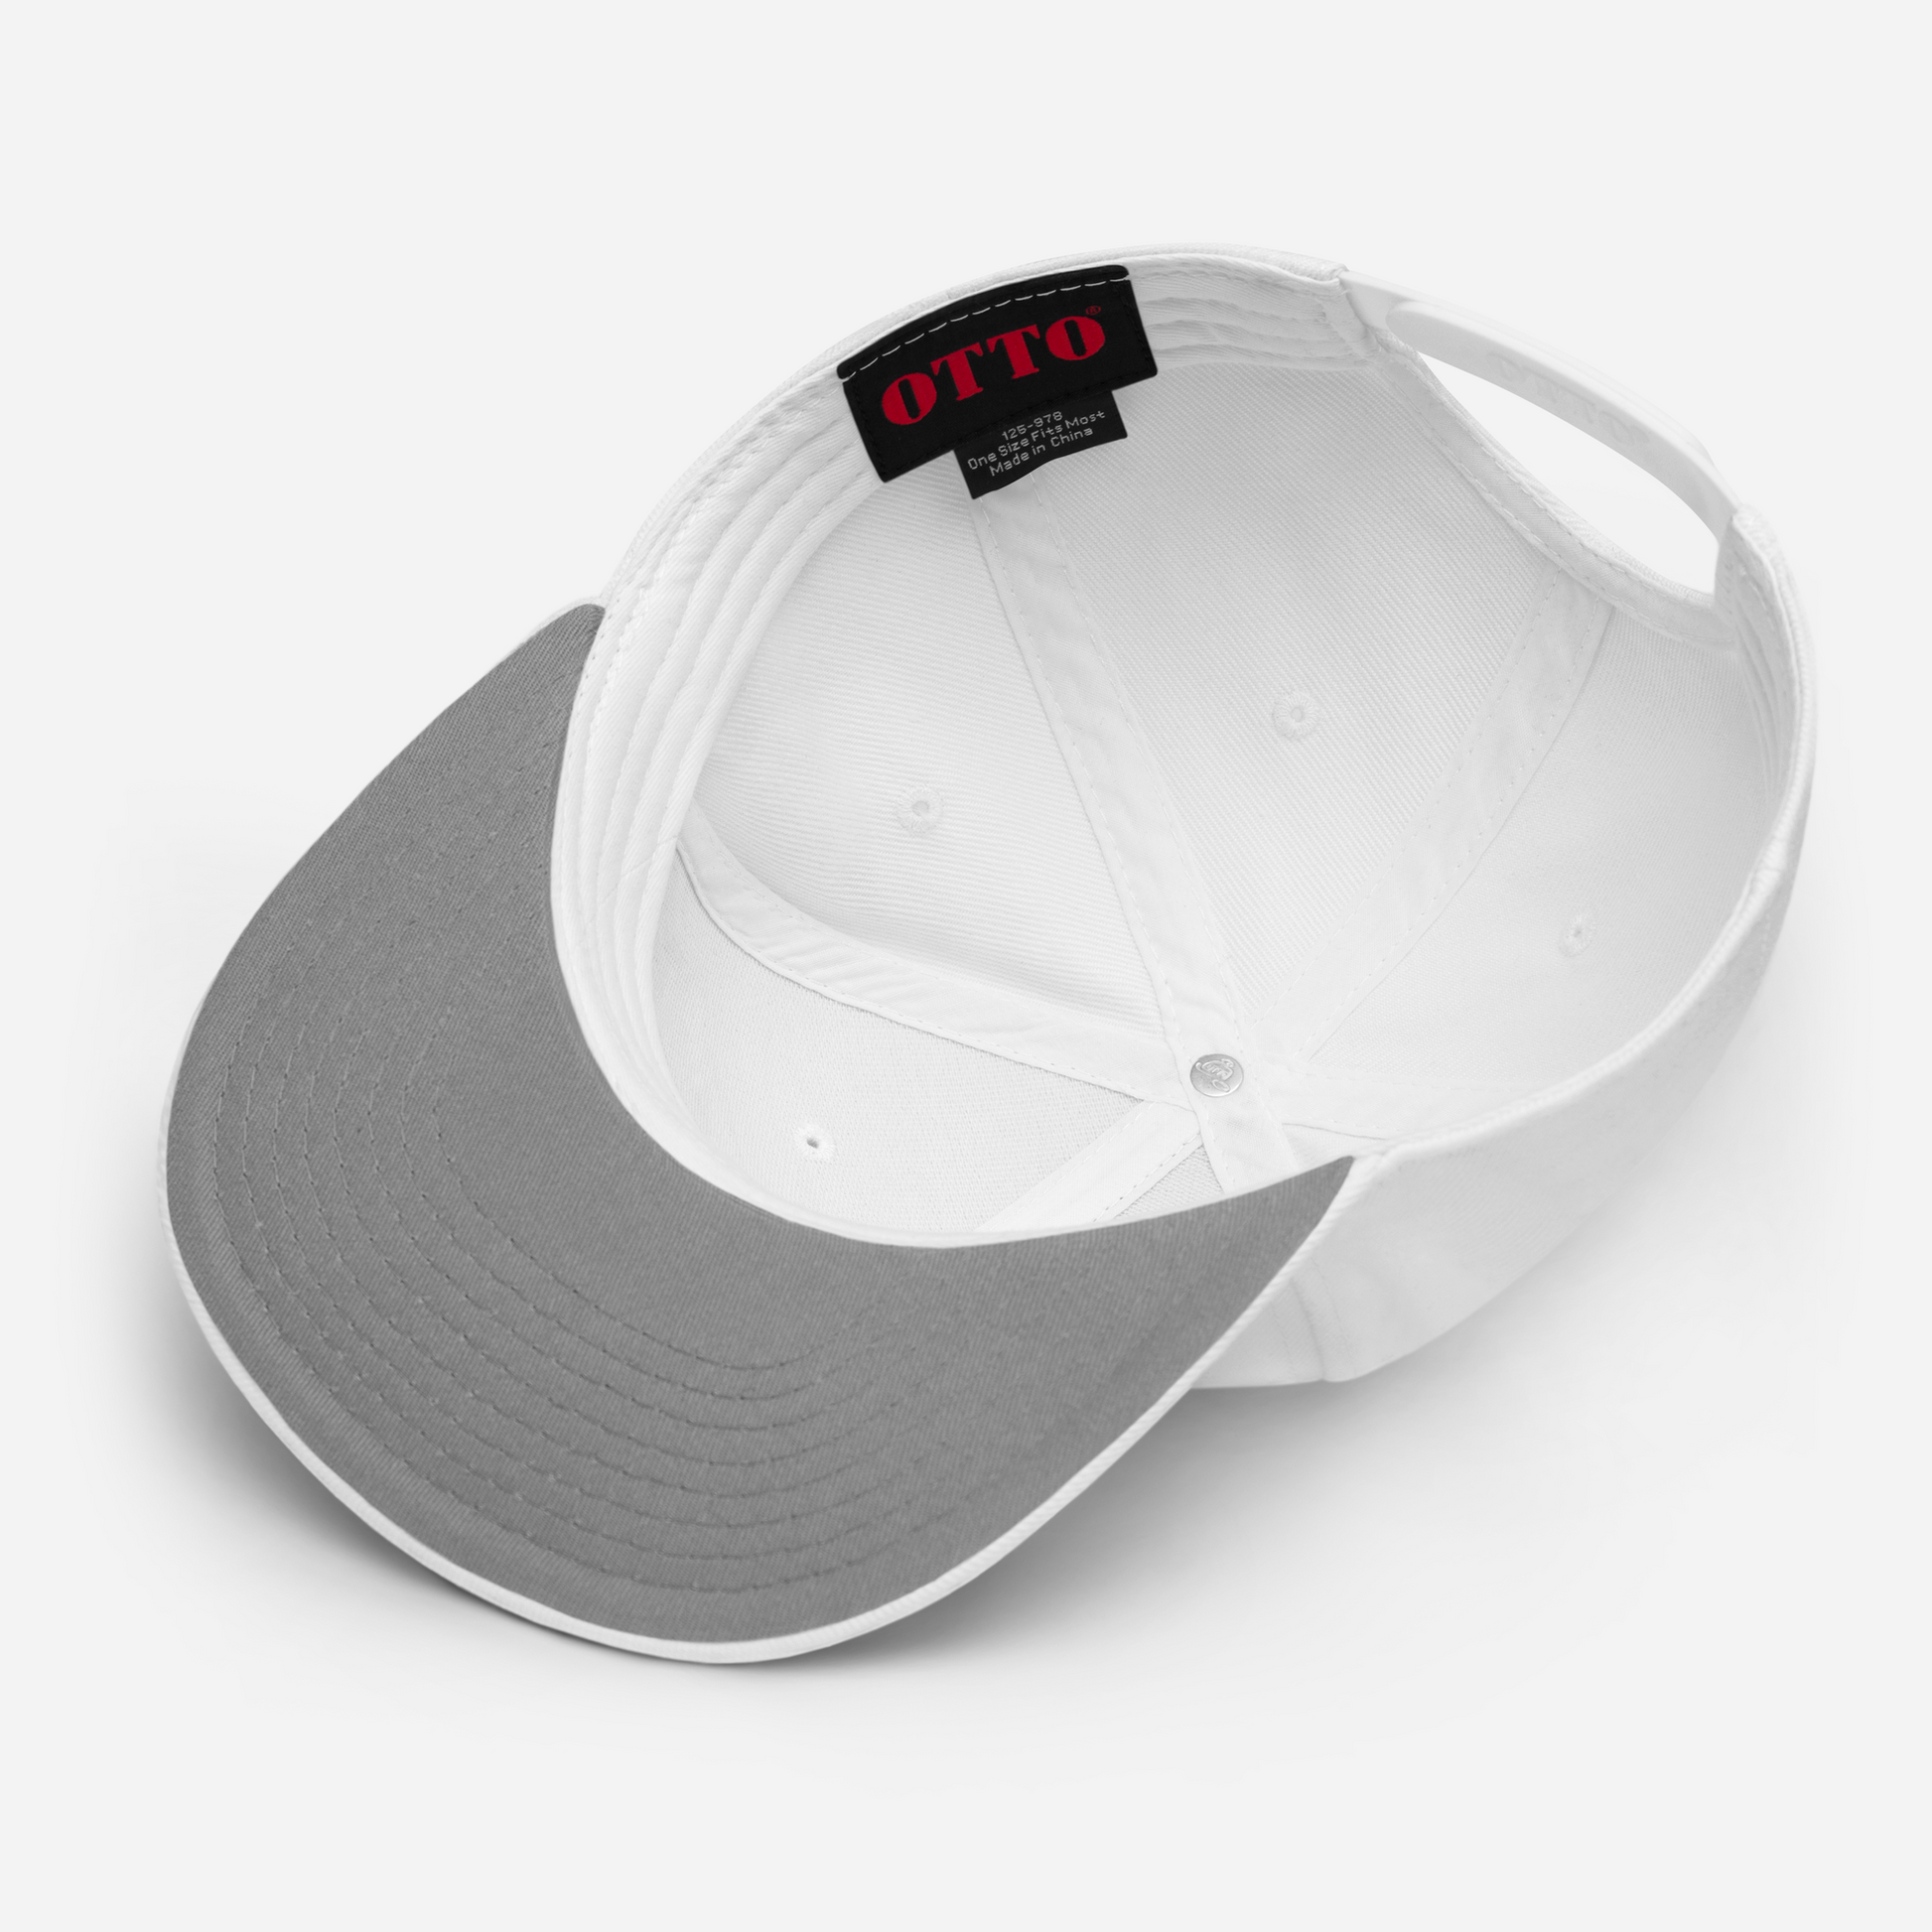 Dill and Jord Embroidered Snapback Hat